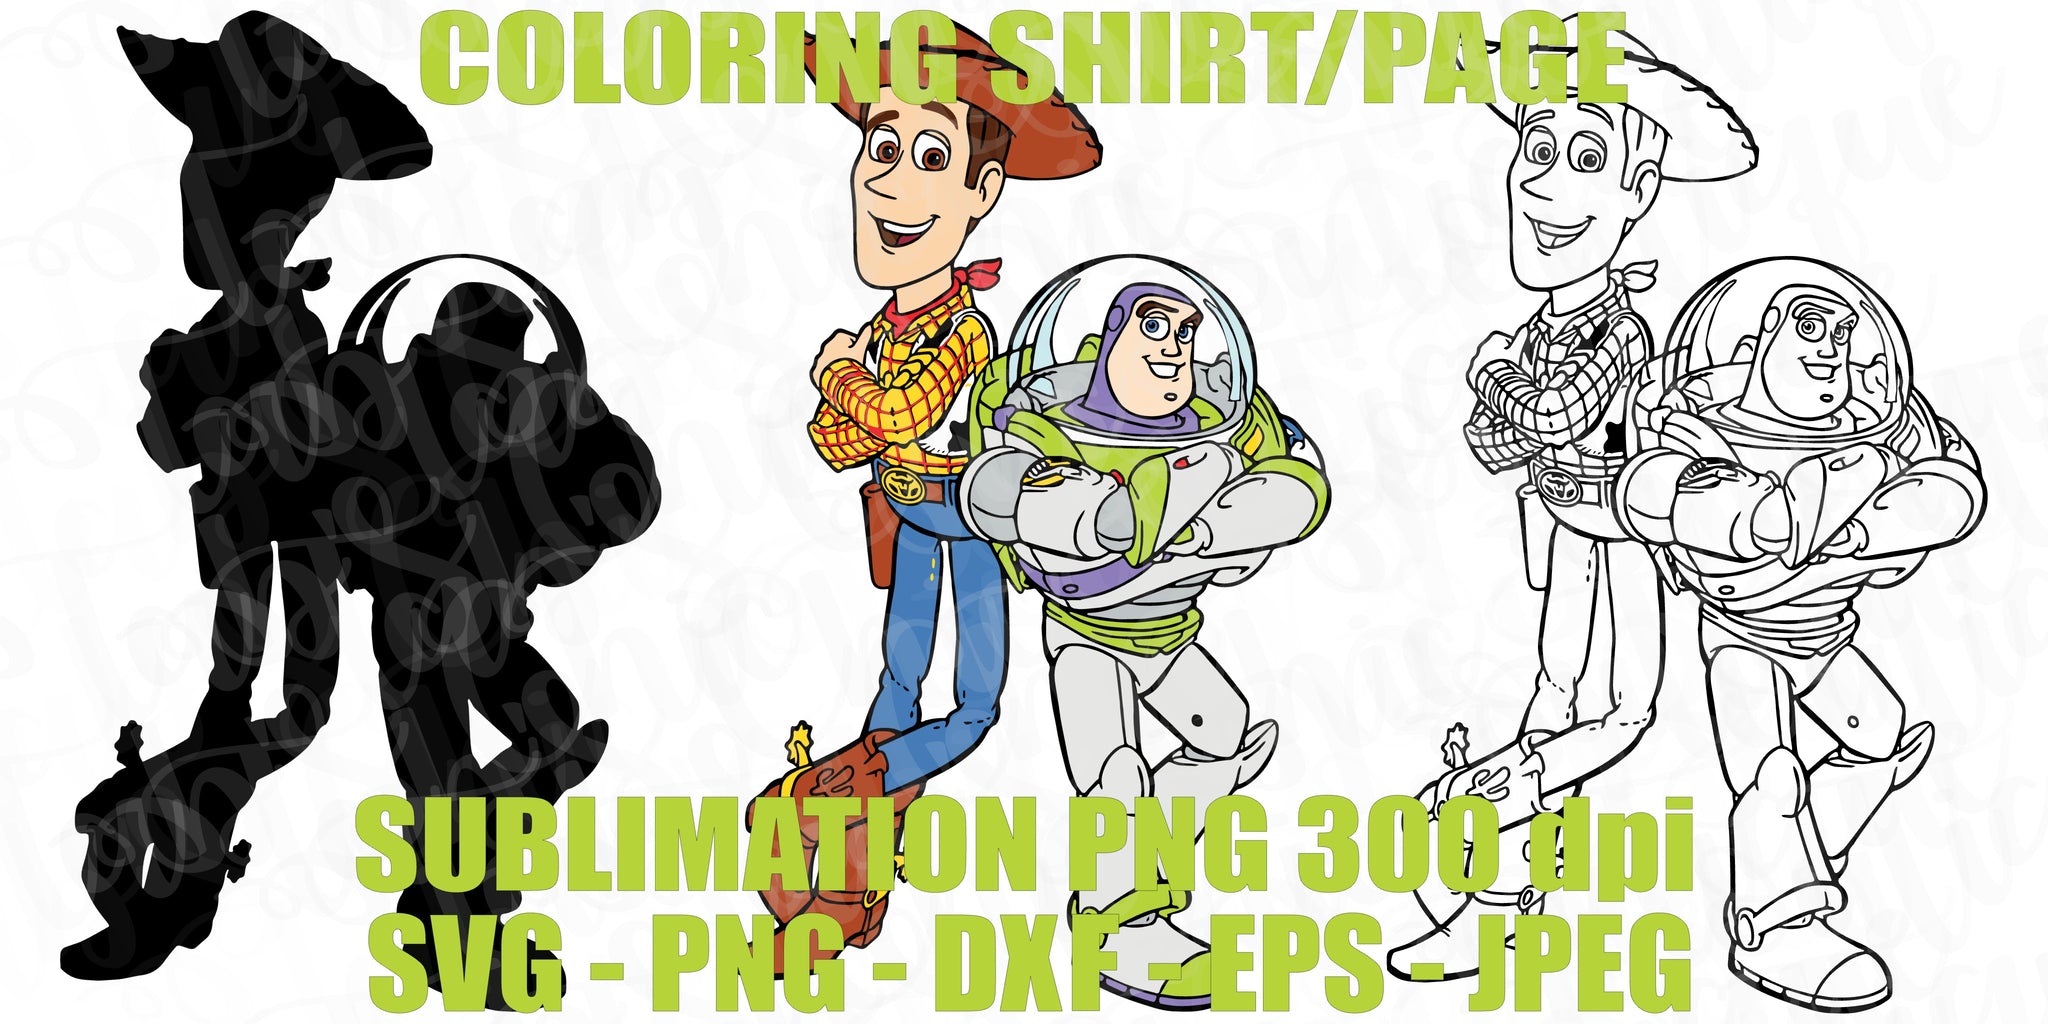 Woody And Buzz Lightyear Toy Story 4 Svg Jpeg High Def 300 Dpi Png Dxf Tab S Chic Boutique